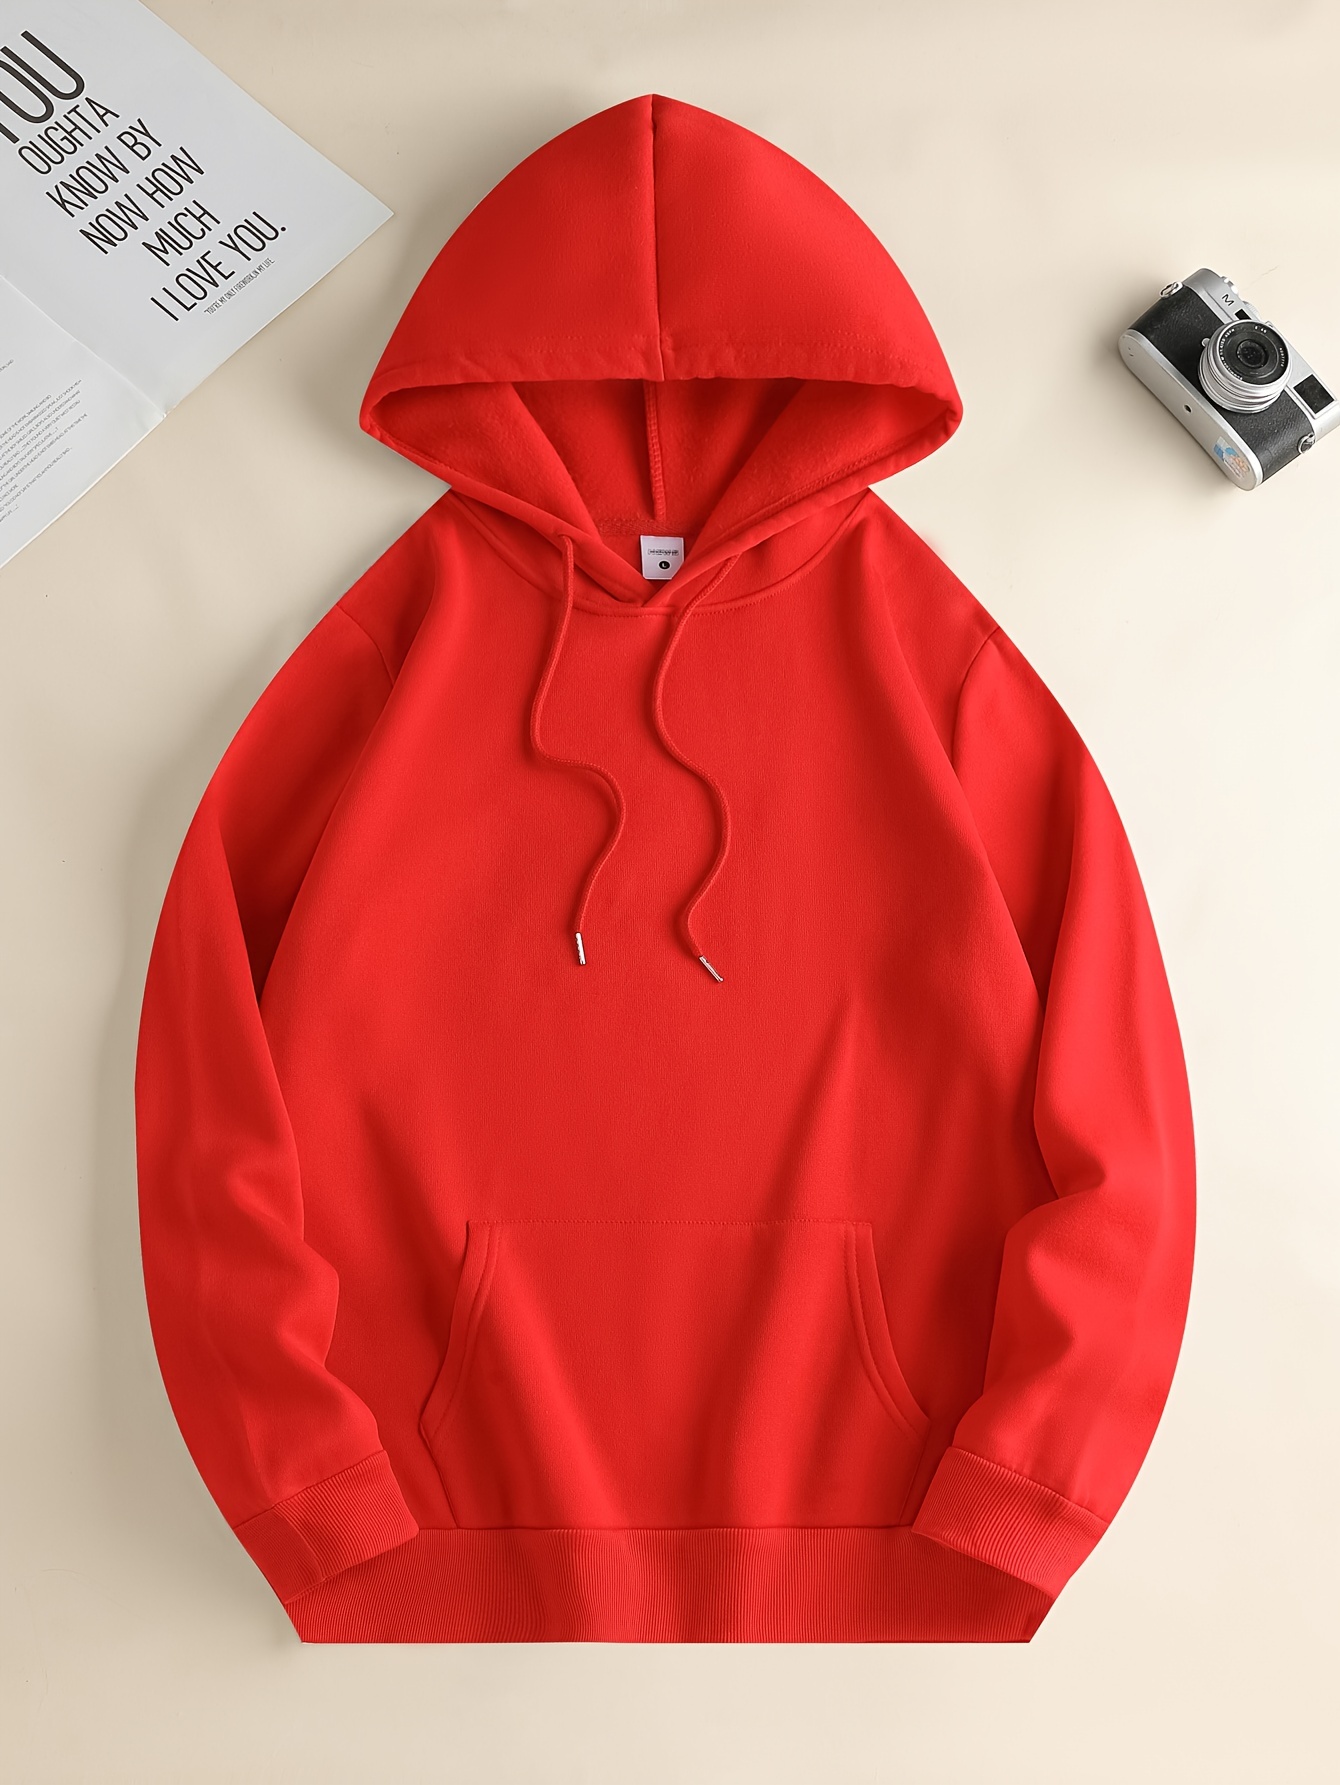 you are amazing print mens pullover round neck hoodies with kangaroo pocket long sleeve hooded sweatshirt loose casual top for autumn winter mens clothing as gifts details 20